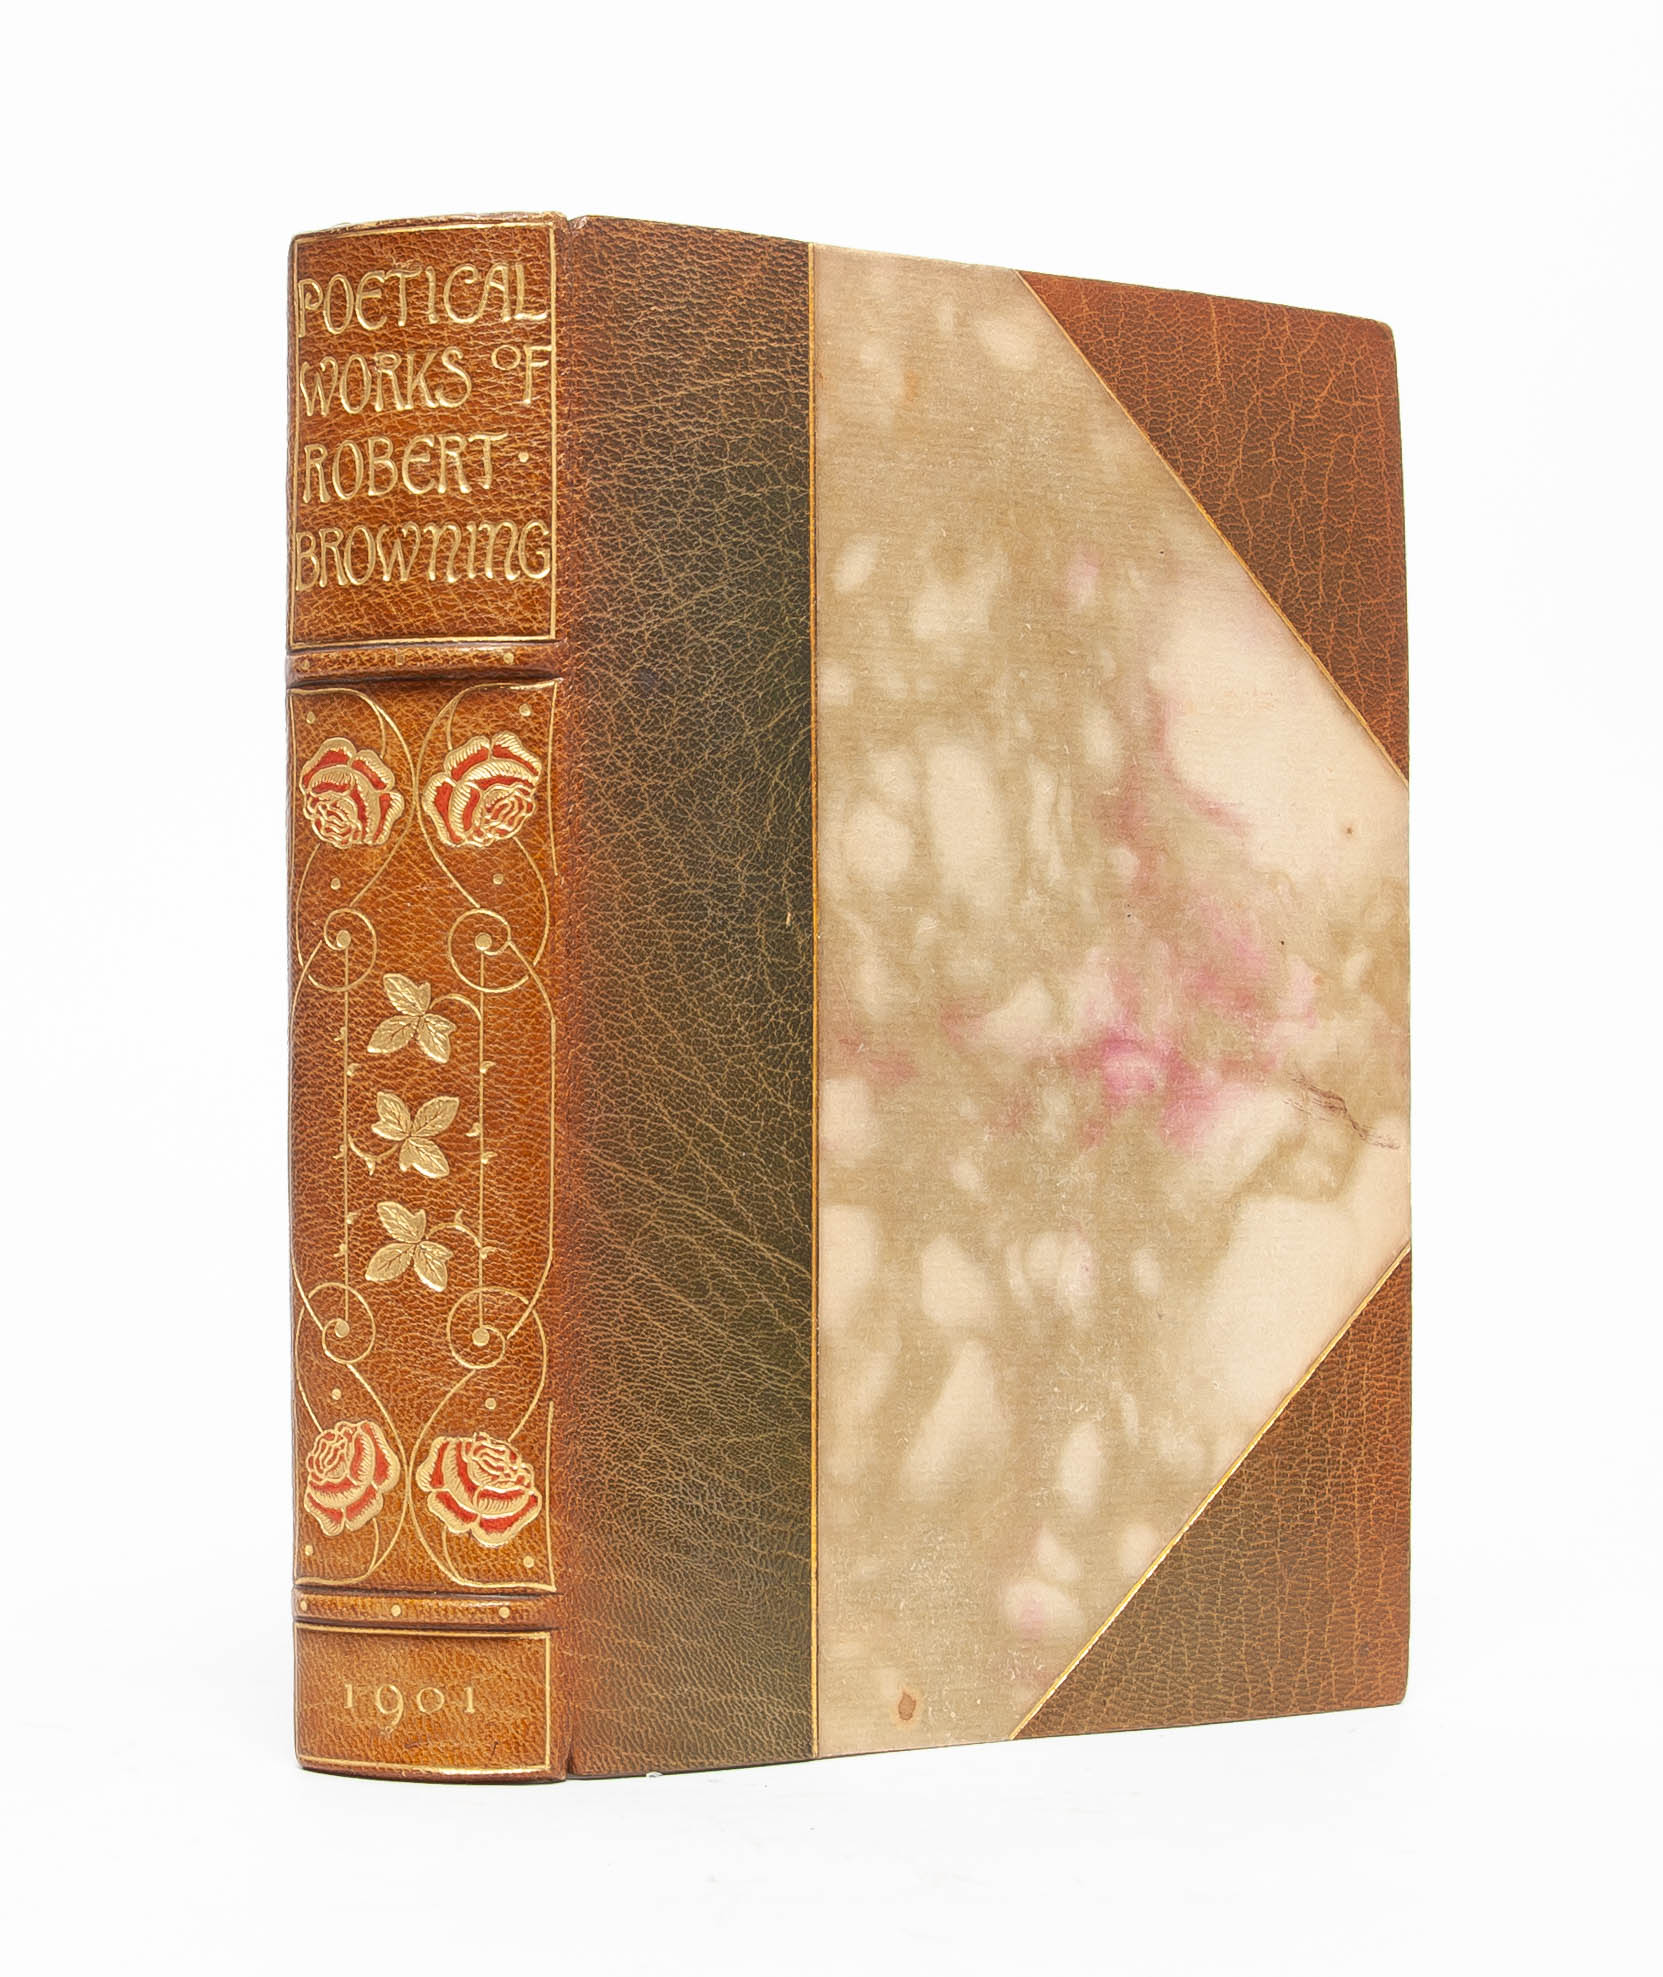 (Item #5150) The Poetical Works of Robert Browning with Portraits. In Two Volumes. Robert Browning.